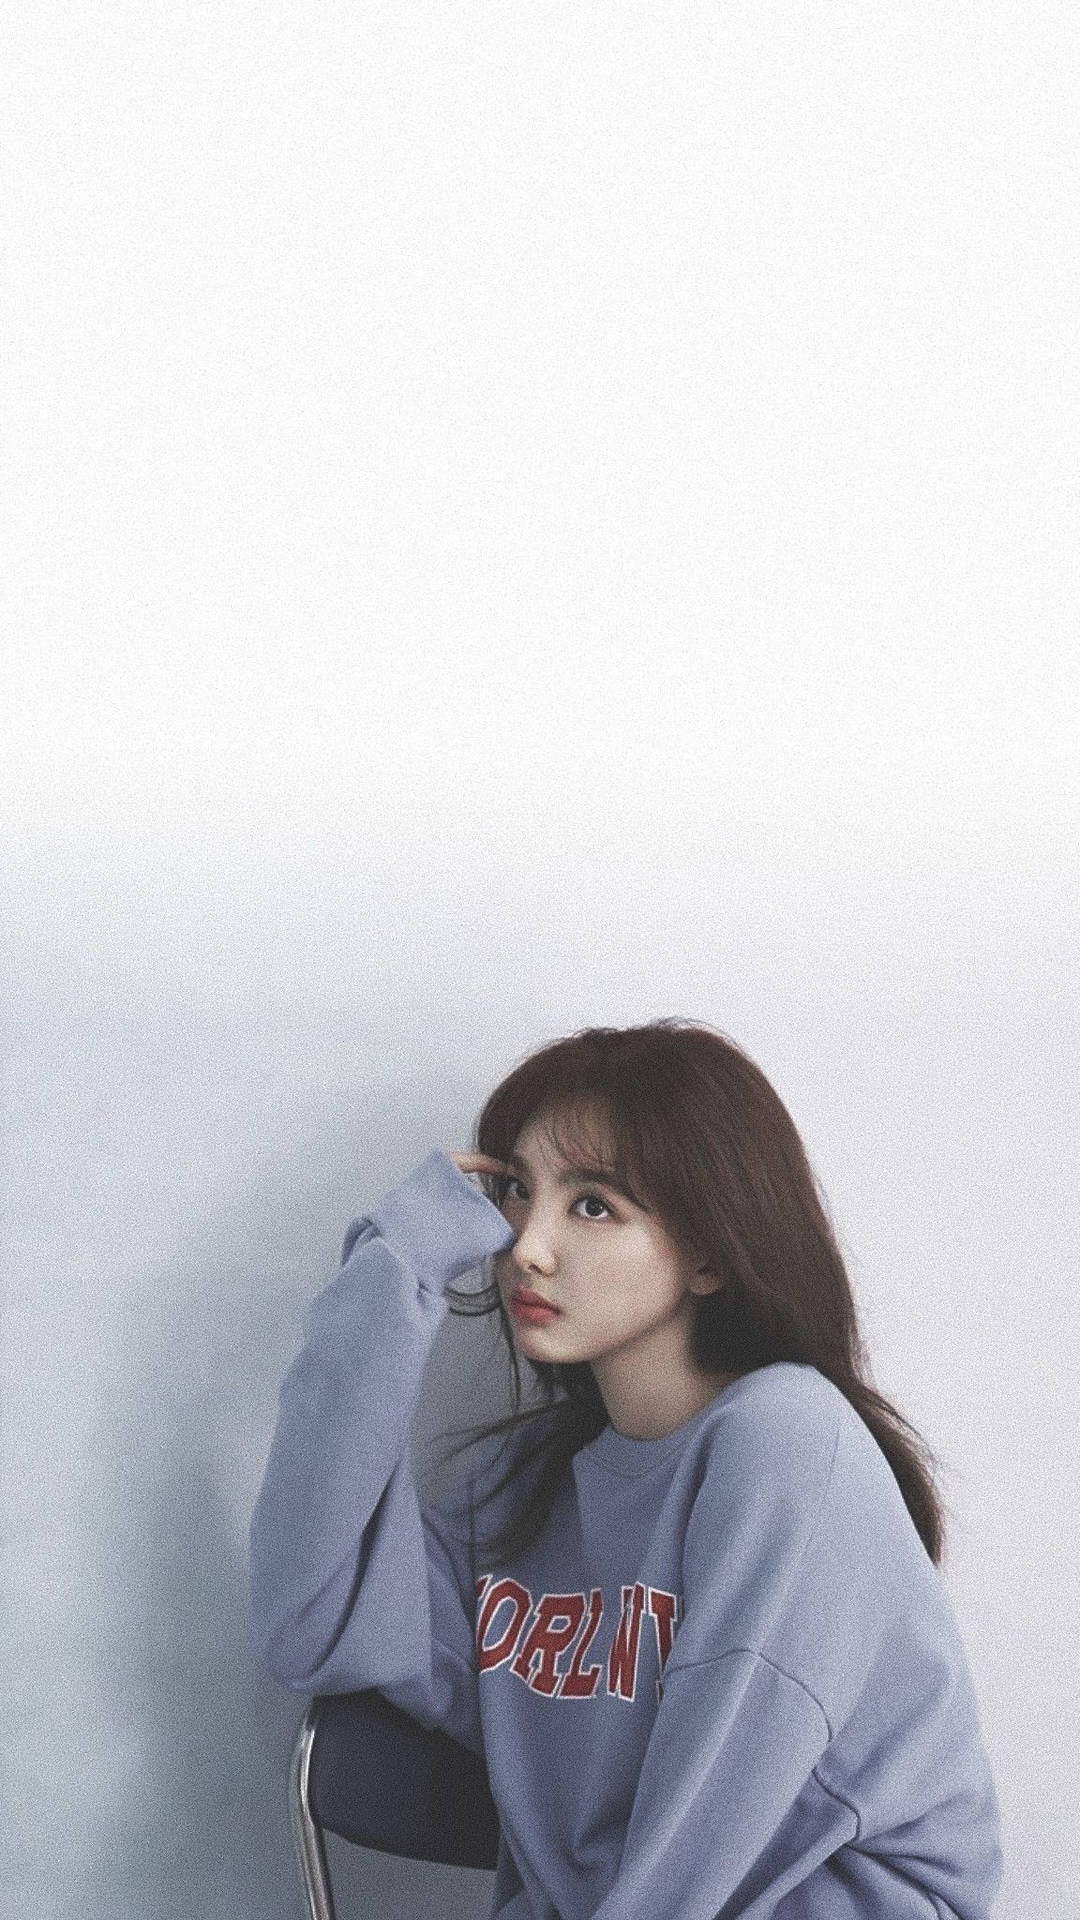 Twice Nayeon Sitting On A Chair Wallpaper